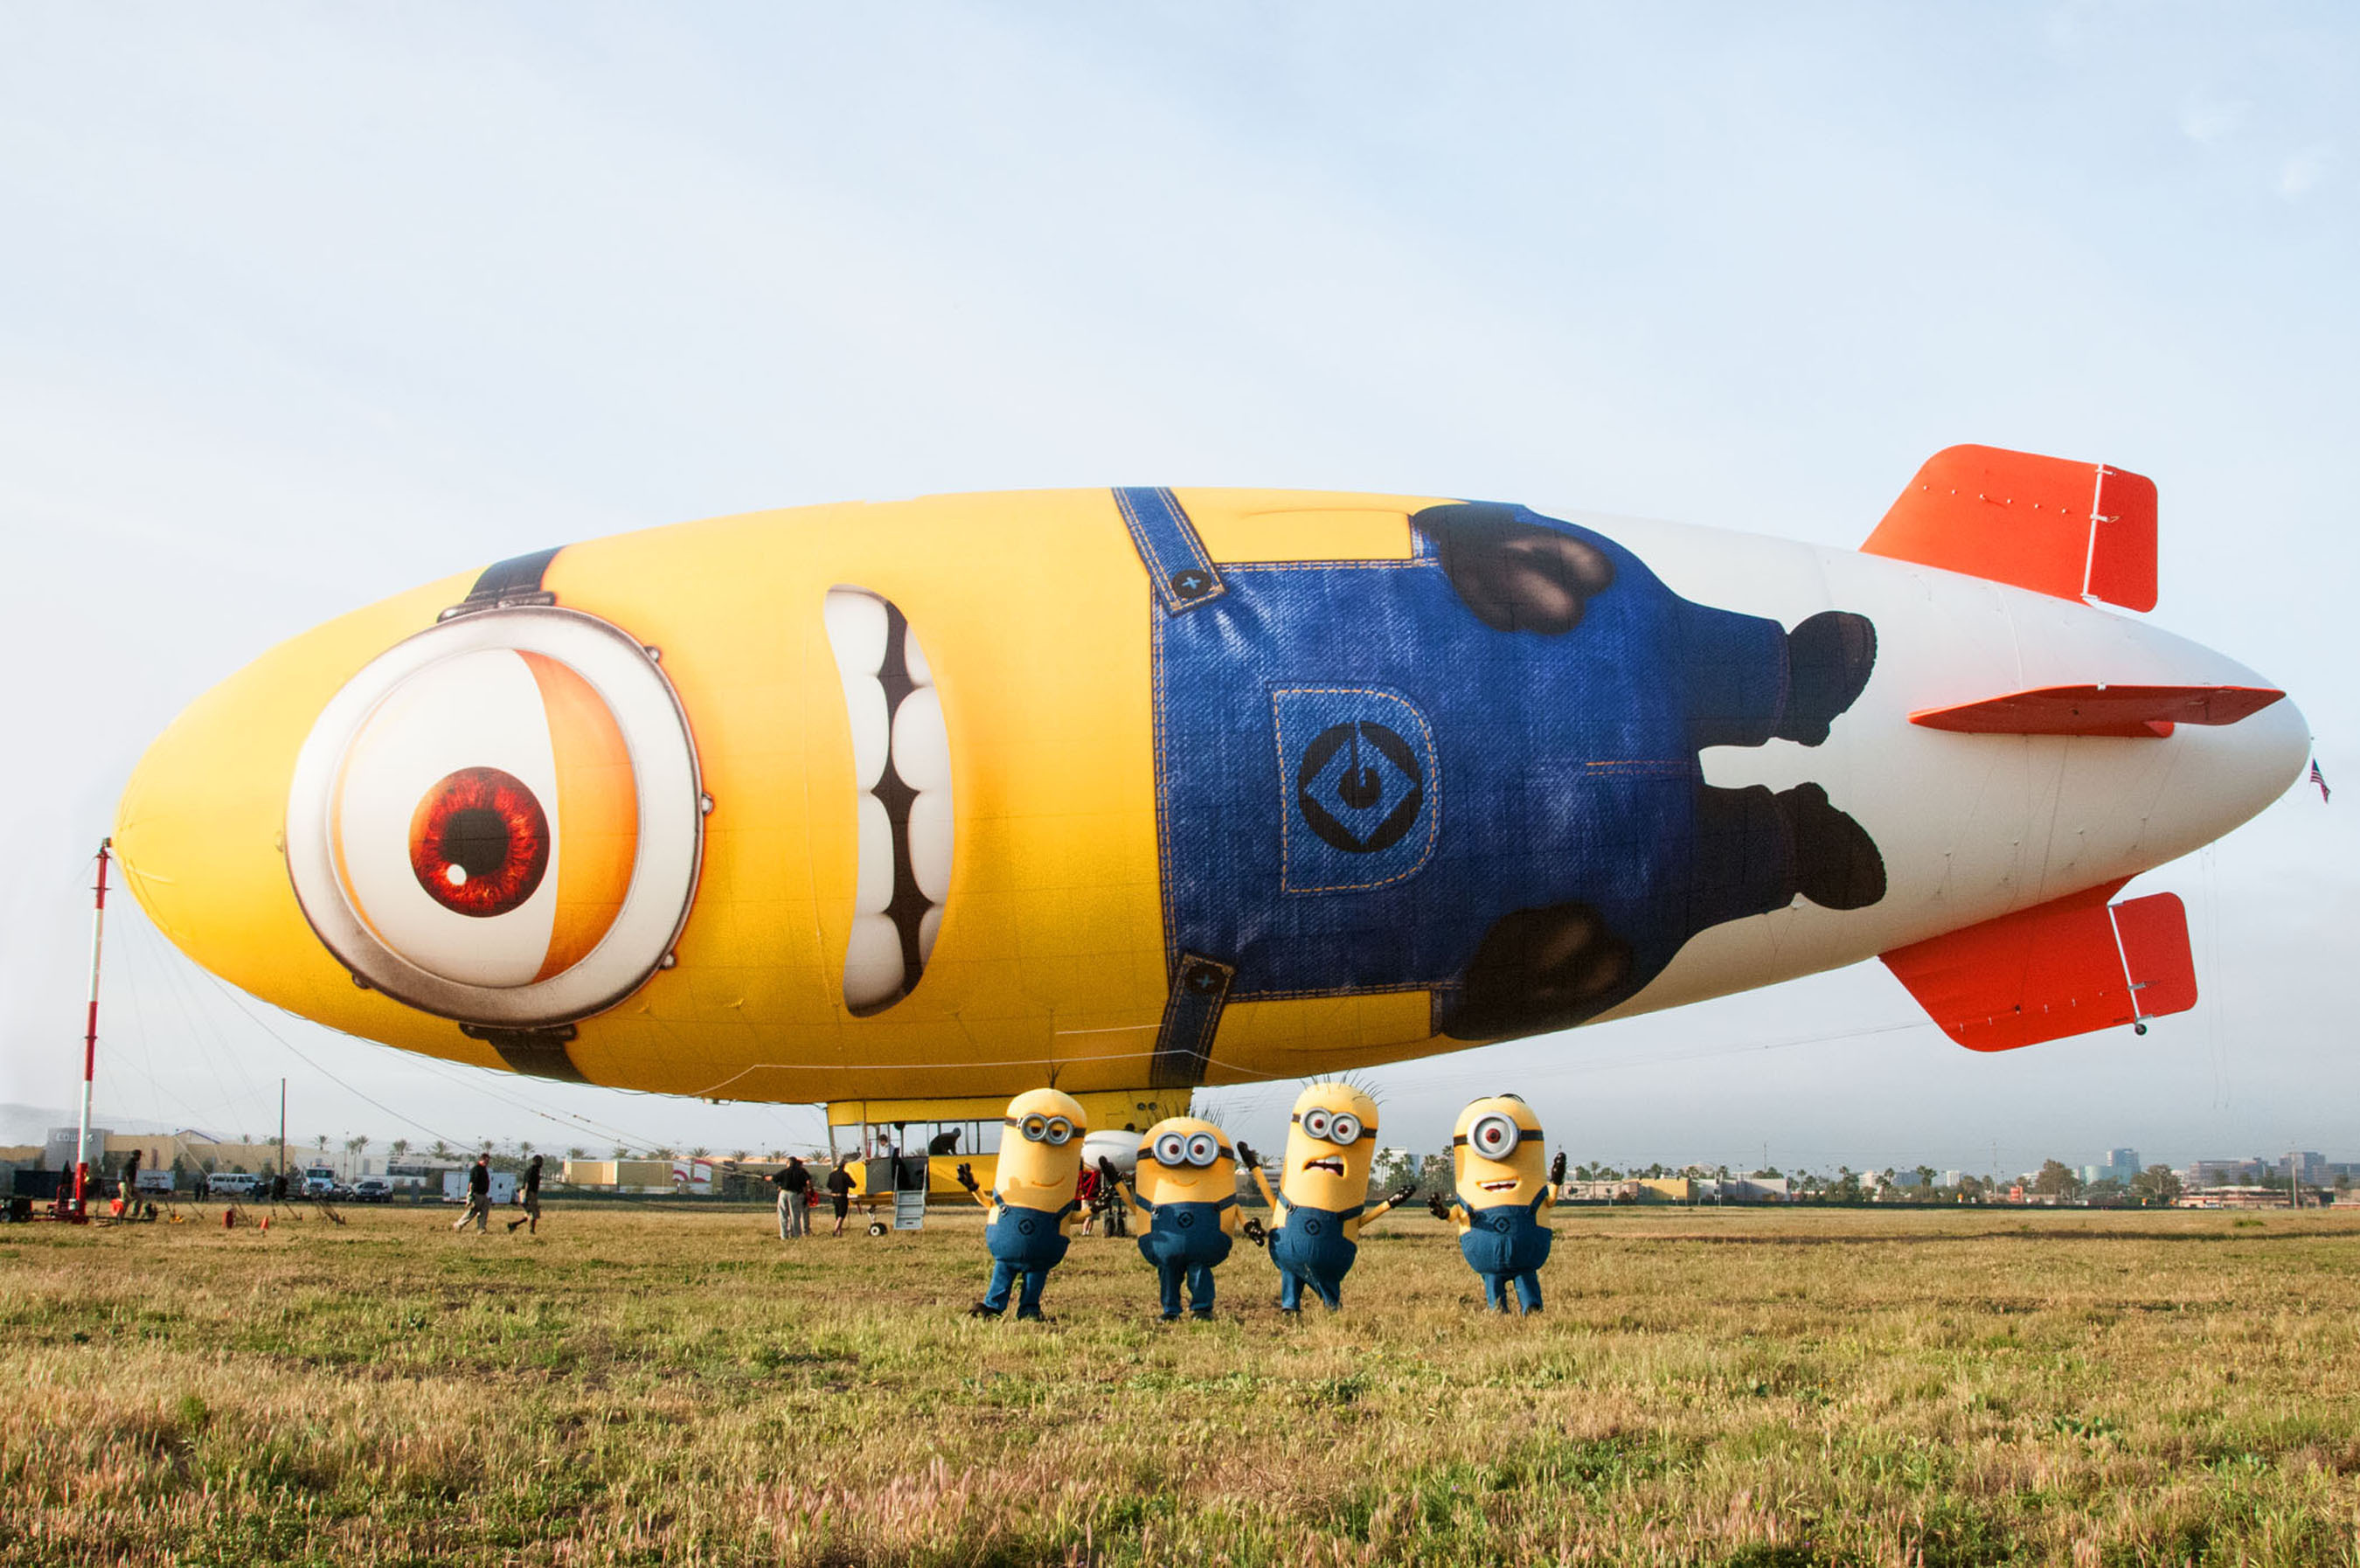 Several of the Minions from Universal Pictures and Illumination Entertainment's DESPICABLE ME 2 will be the first to board the Despicablimp. (PRNewsFoto/Universal Pictures, Suzanne Hanover) (PRNewsFoto/UNIVERSAL PICTURES)